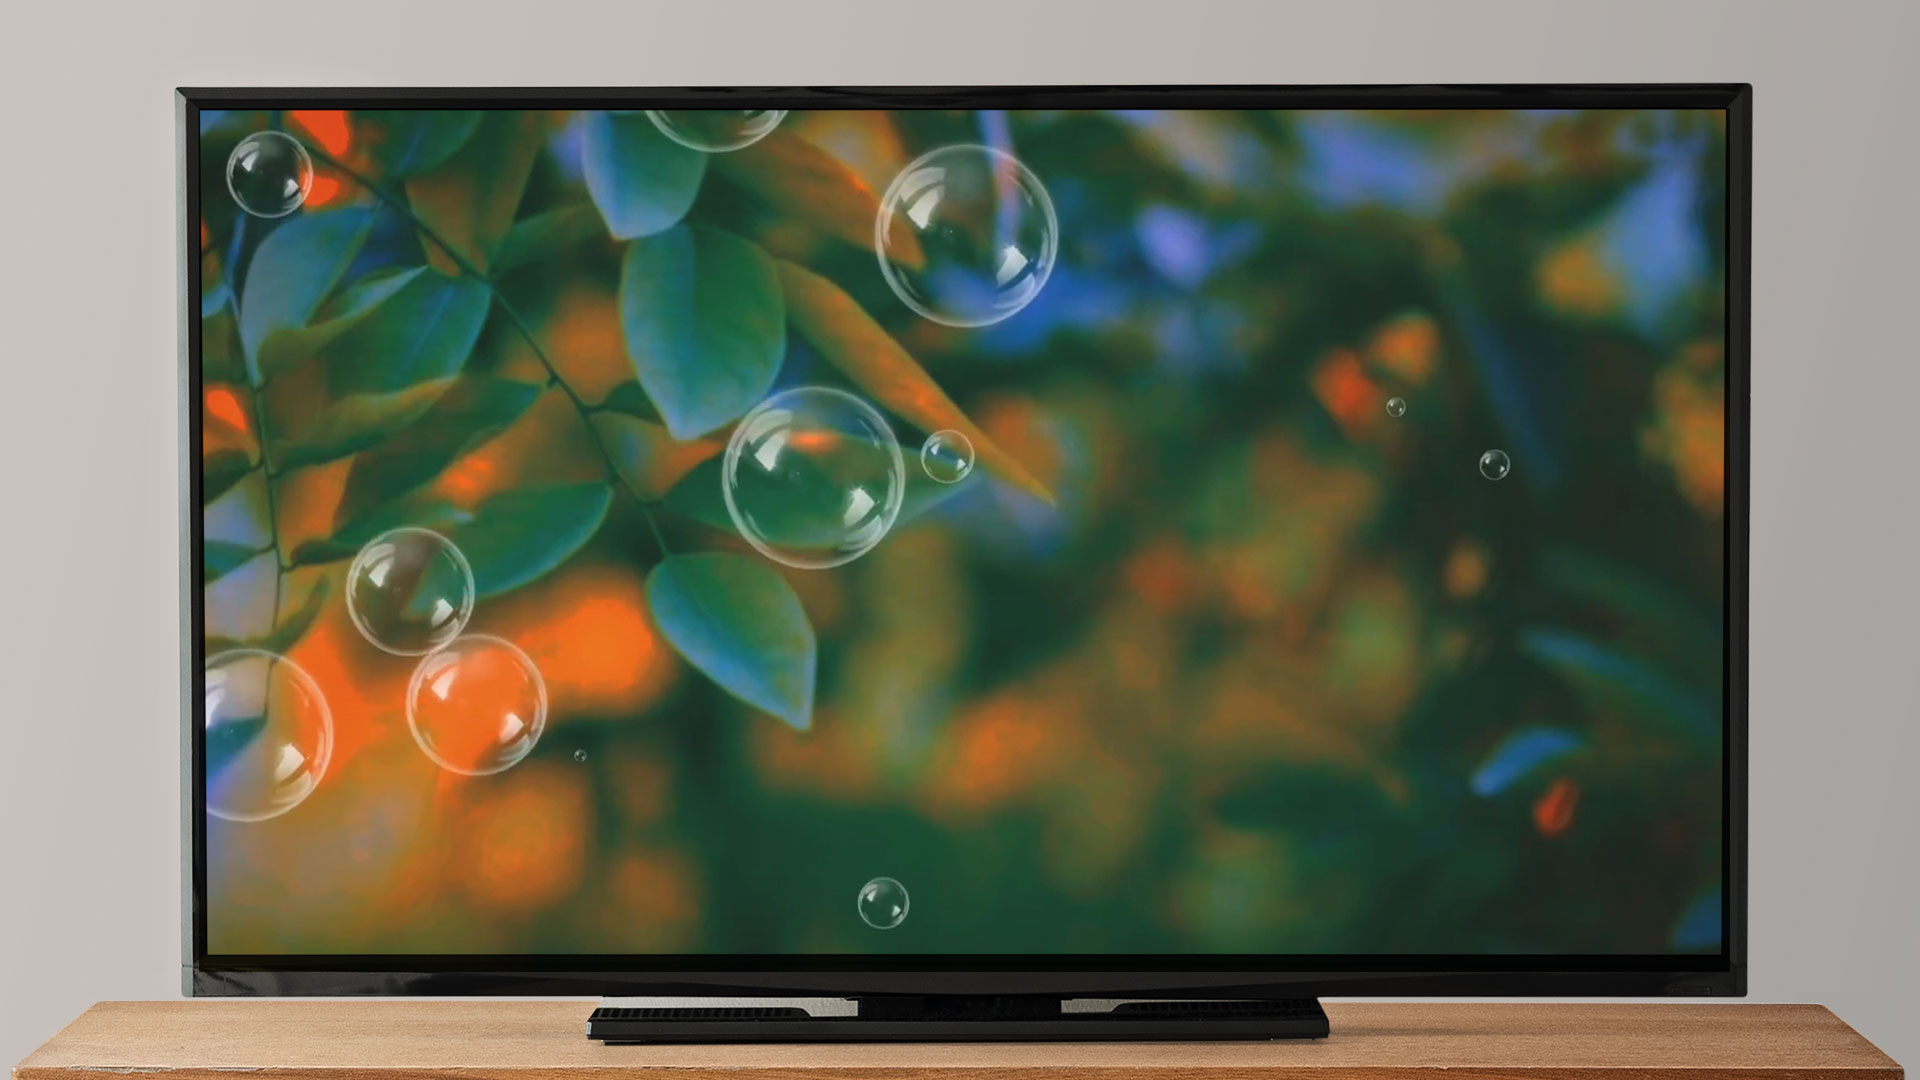 Relaxing Colourful Bubbles Backgouand - UHD Satisfaying Video Relaxing Music - Screensaver for Fire TV - NO ADS